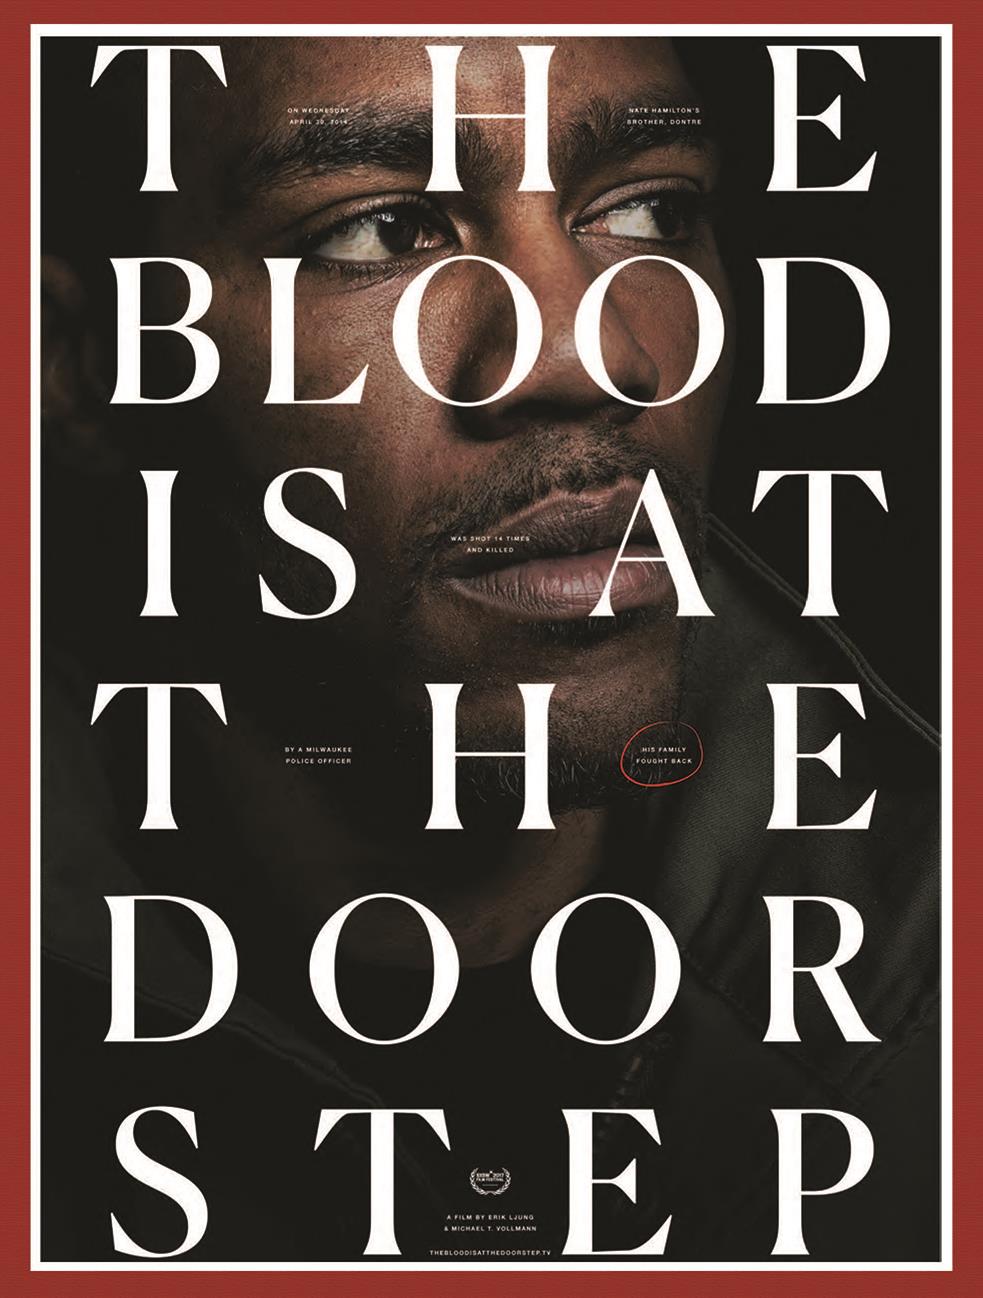 The Blood is at the Doorstep Documentary Viewing and Talkback